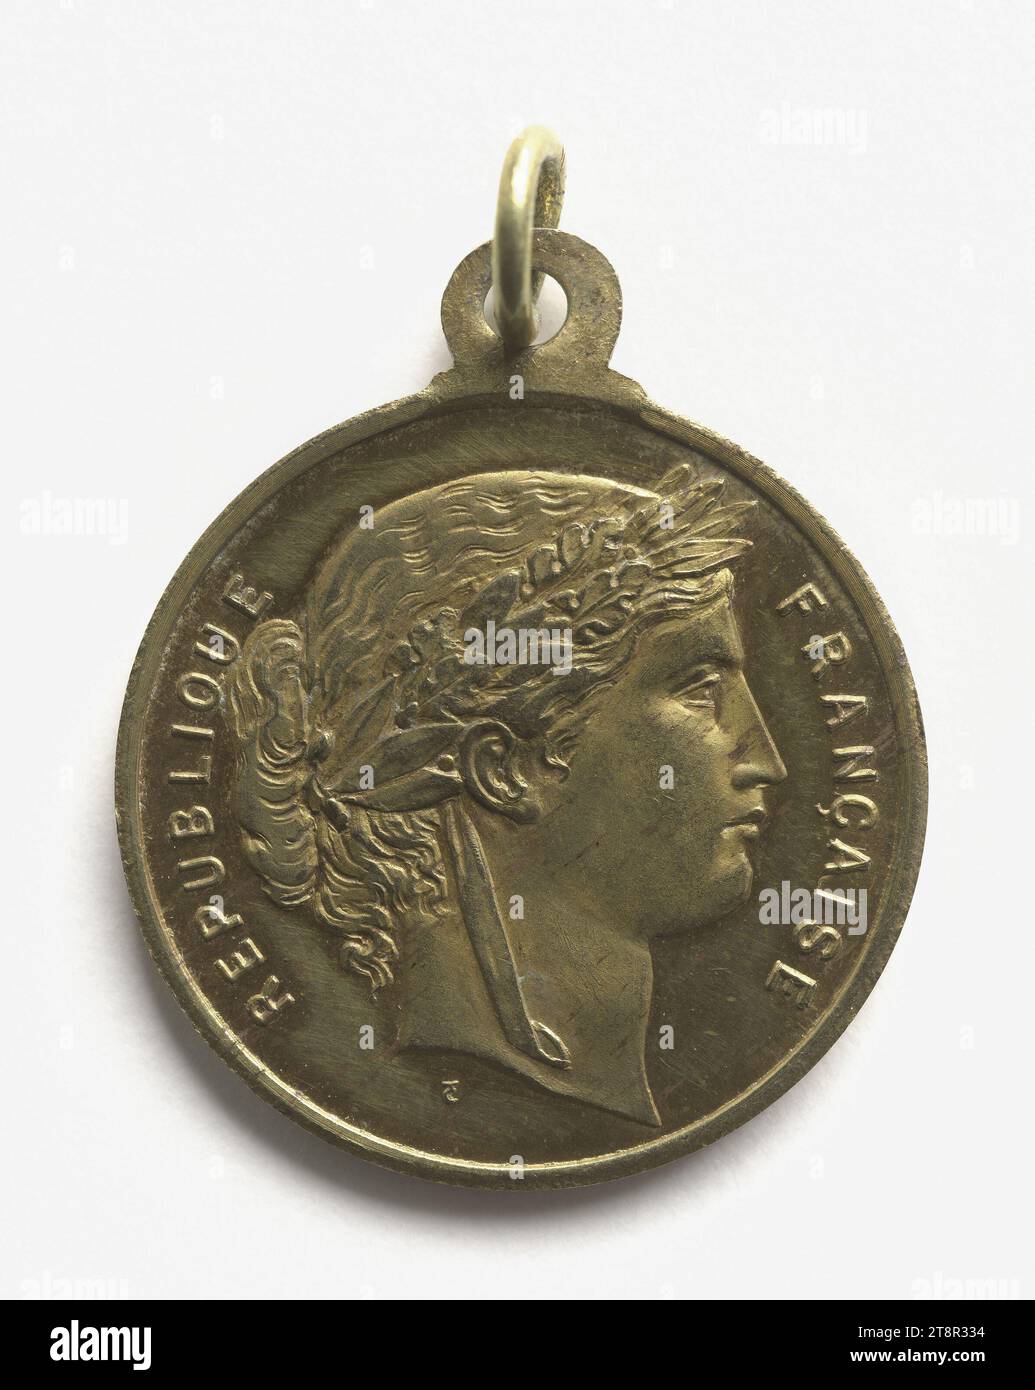 Band and Orphéon Contest in l'Aigle (Orne), September 8, 1872, Array, Numismatic, Medal, Copper, Gilt = gilding, Dimensions - Work: Diameter: 2.3 cm, Weight (type dimension): 4.97 g Stock Photo